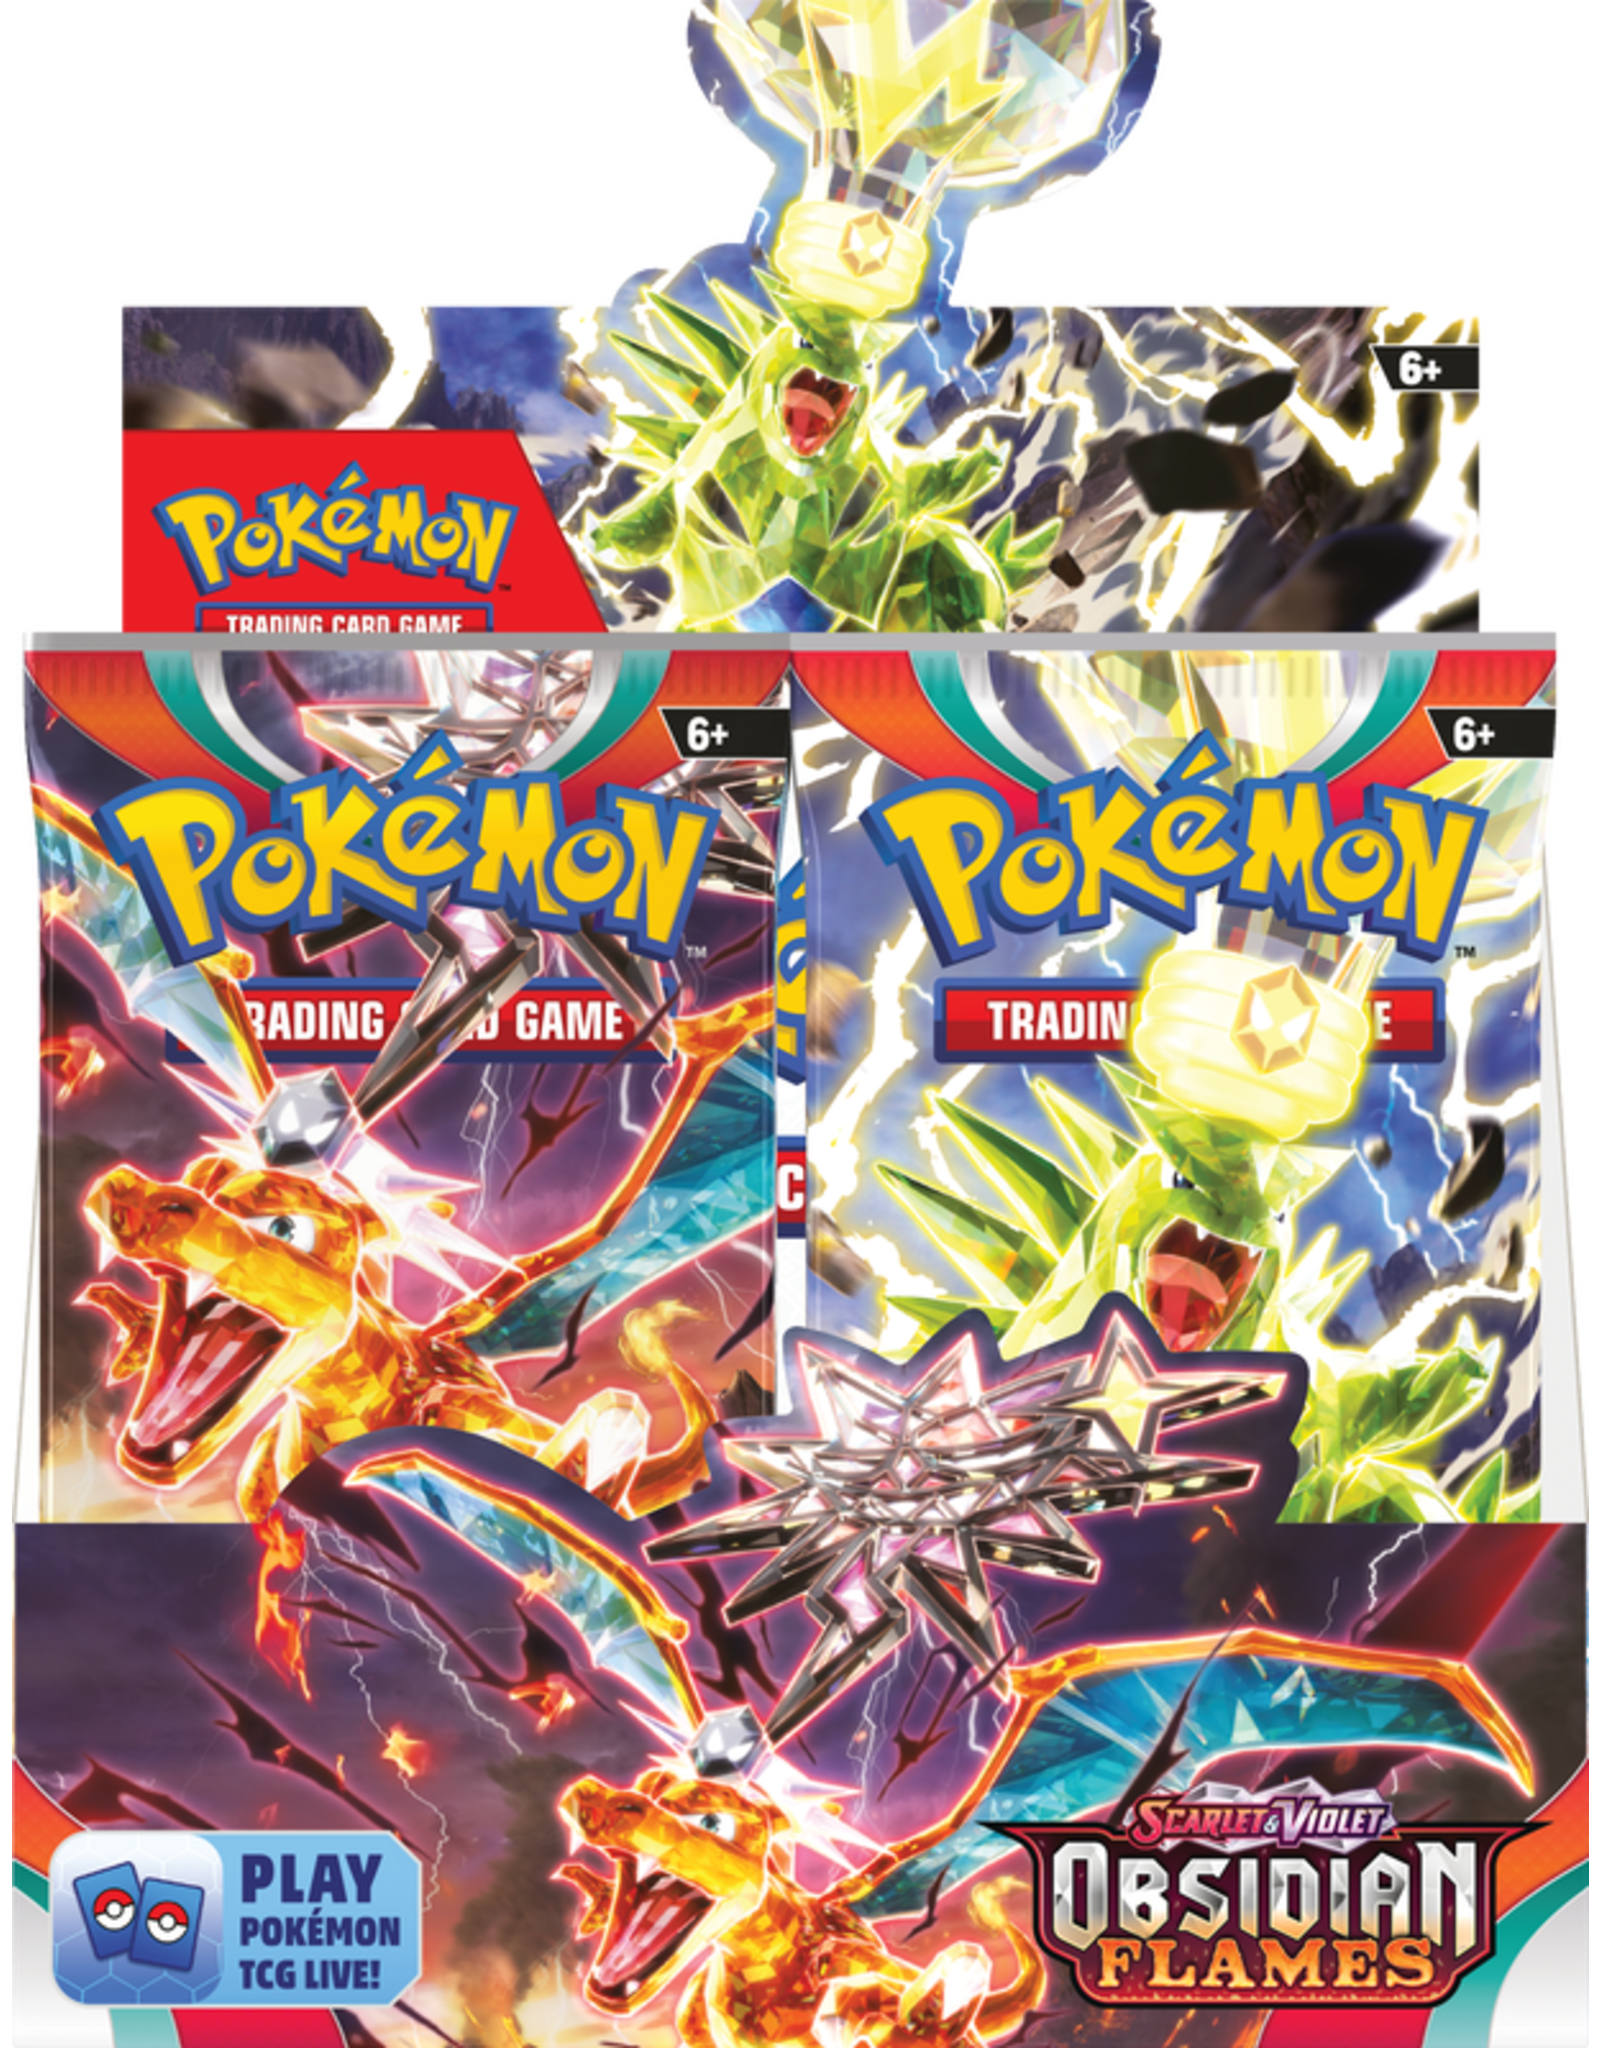 Pokemon S&V Obsidian Flames Booster Box (Available August 7)